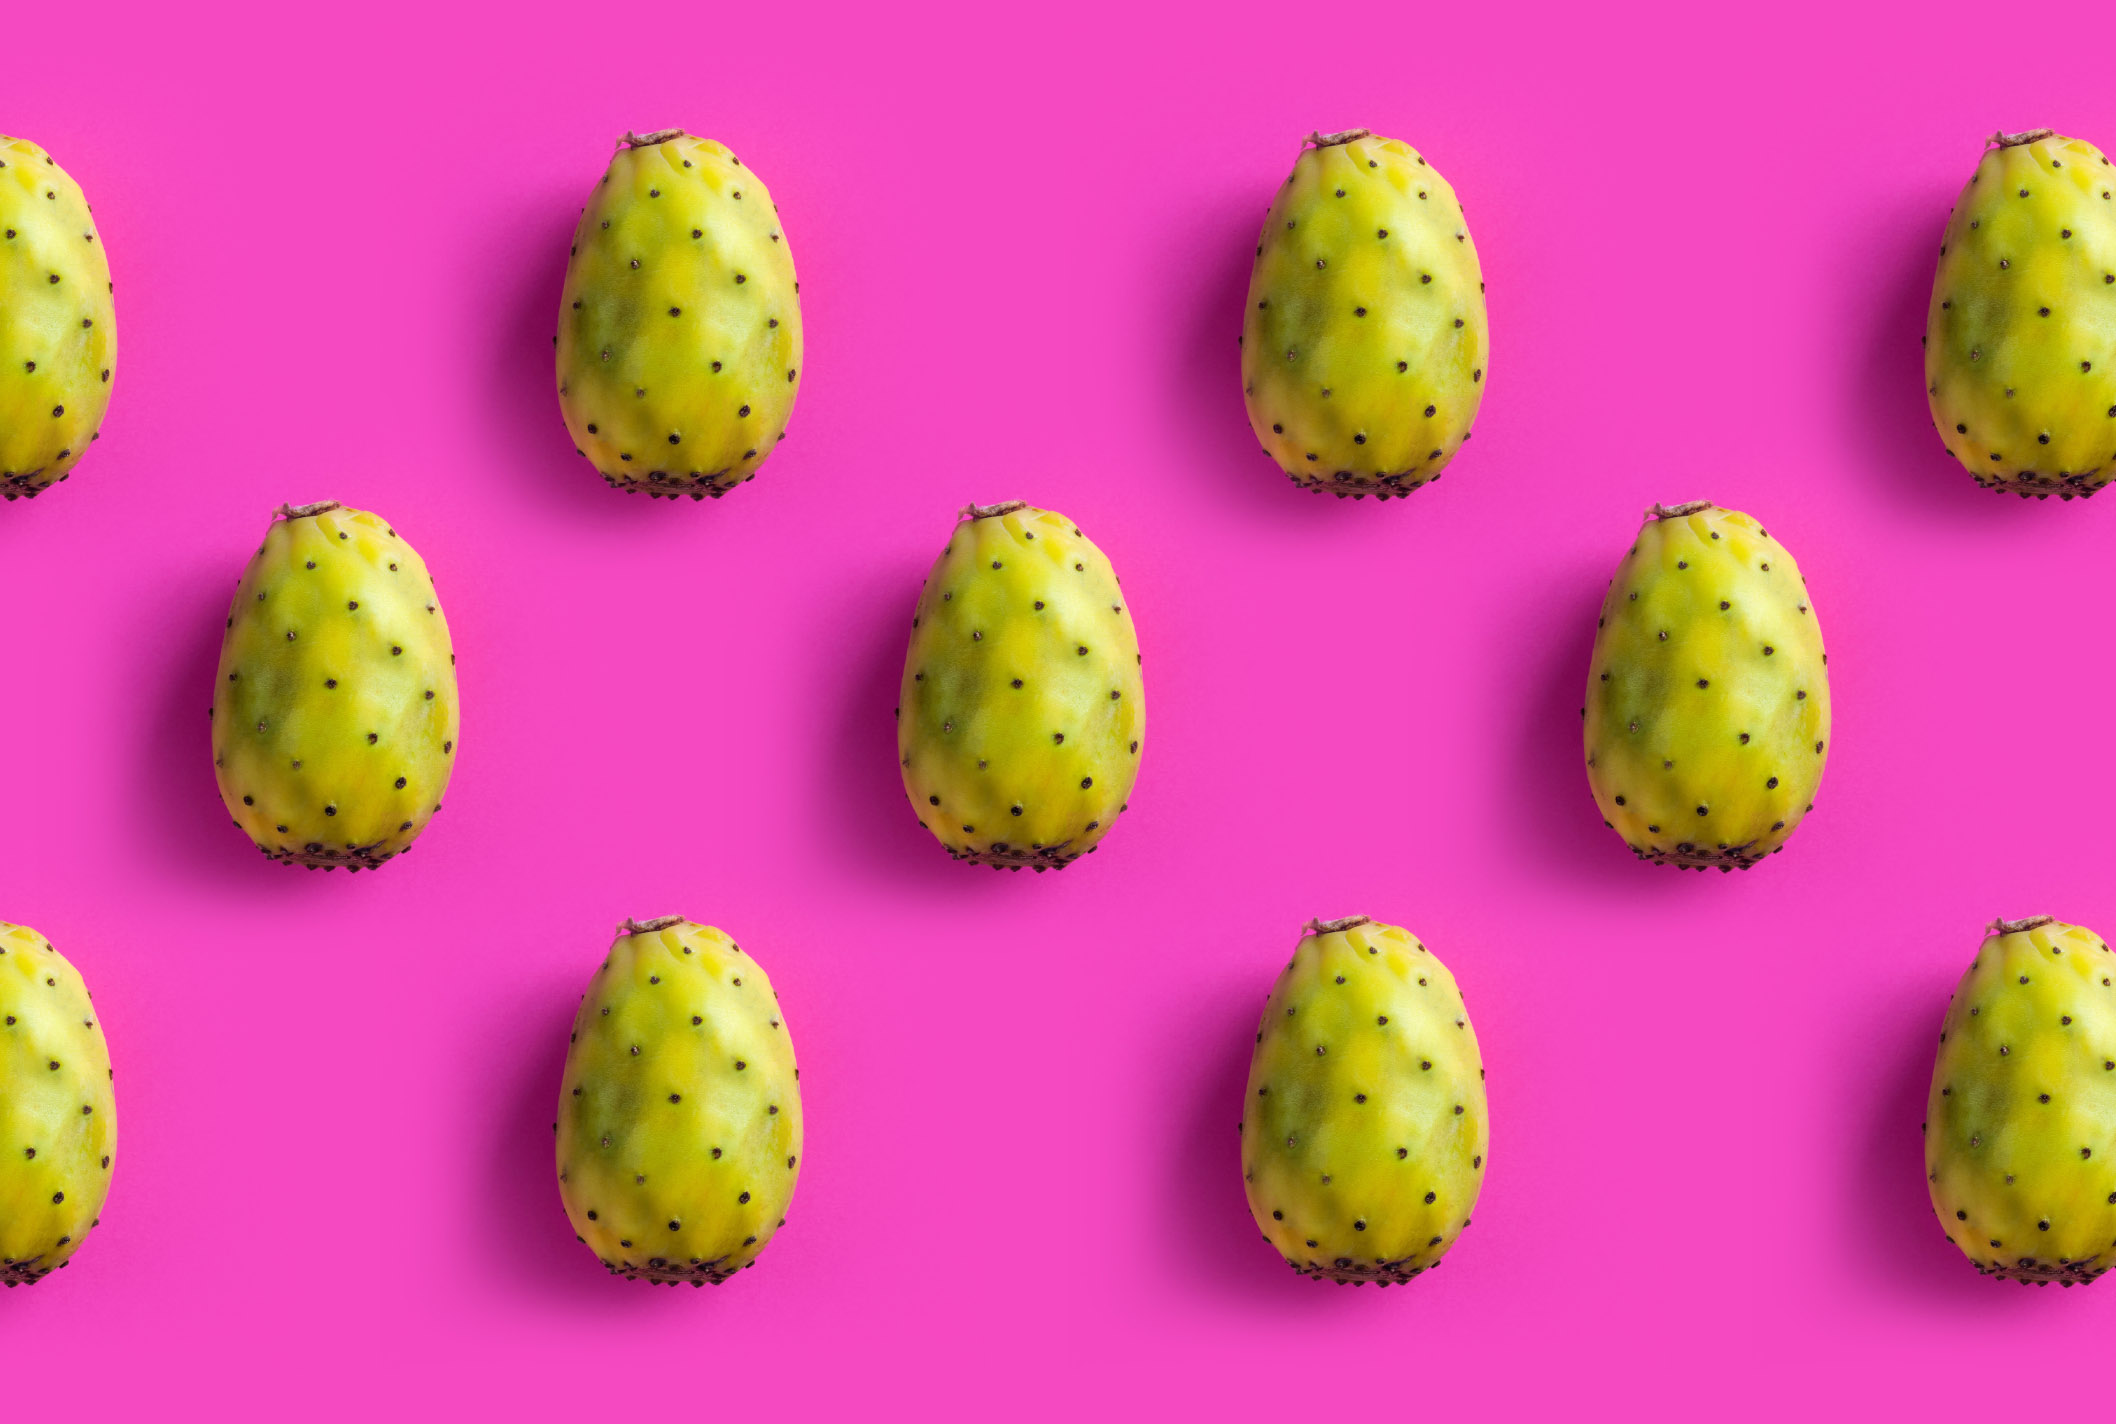 Prickly Pear fruits on a neon pink background